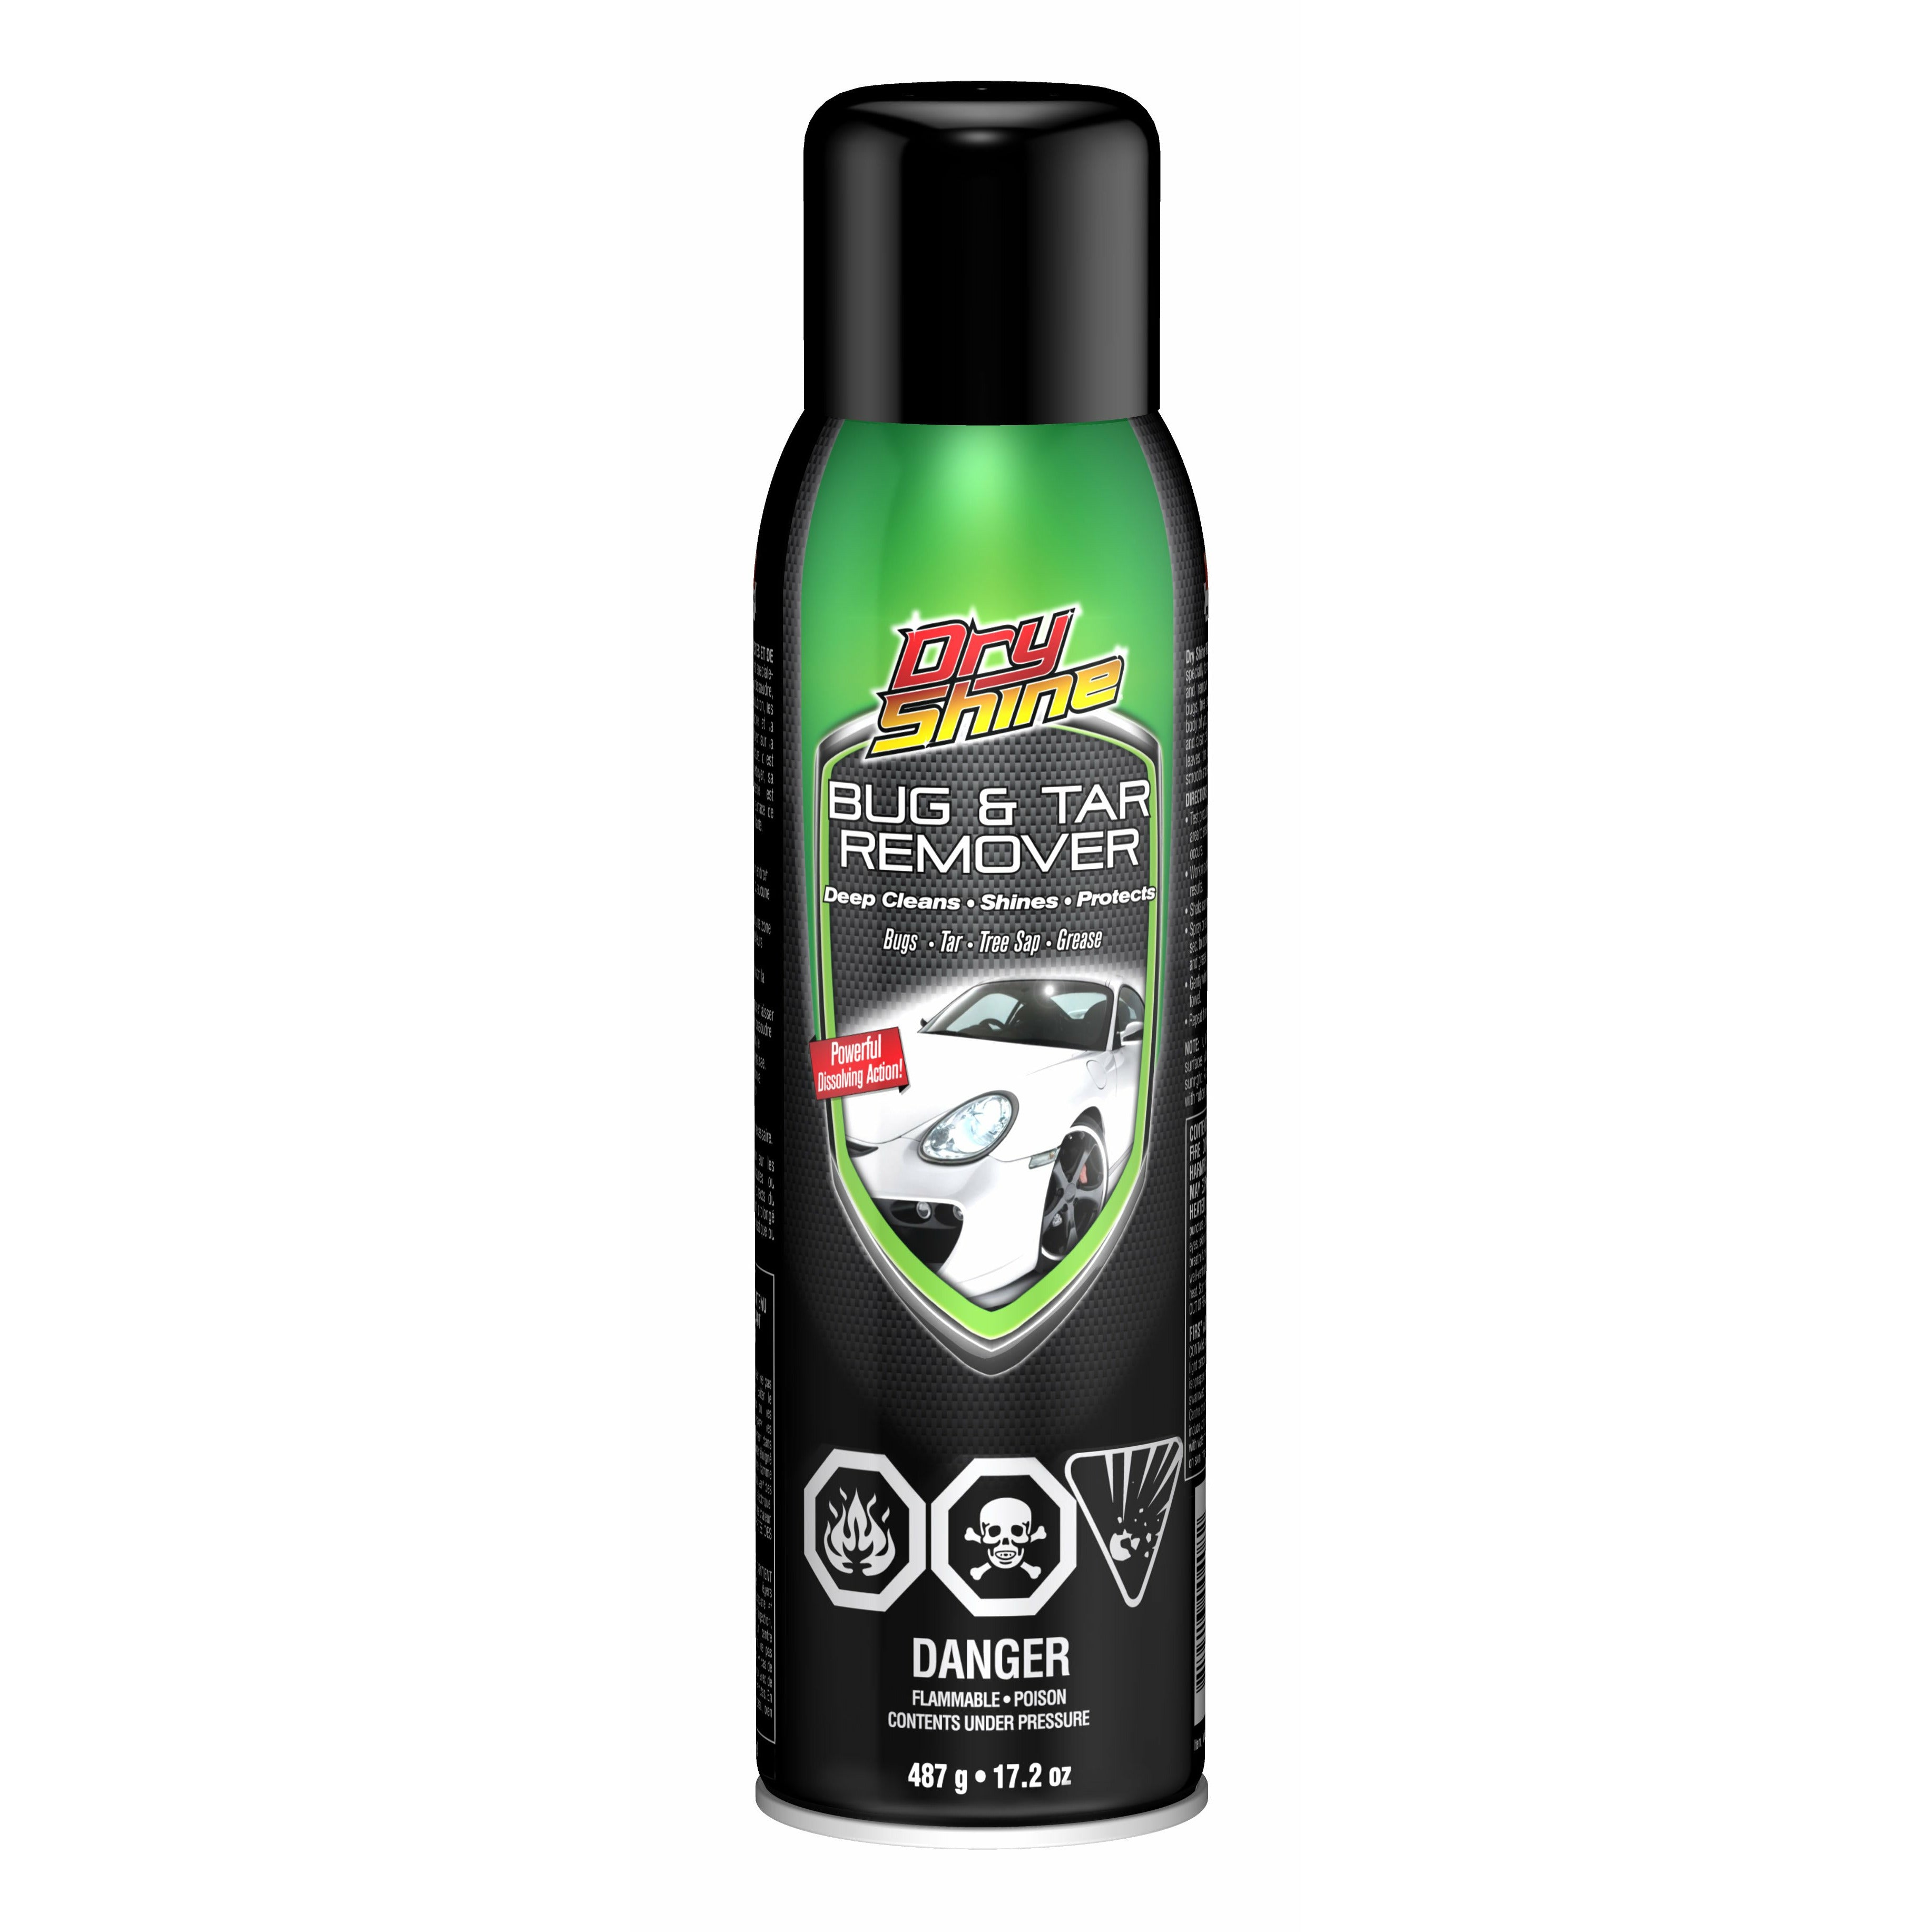 WASH&WHIPS Hockenheim Bug Remover - for Dead Insects, Droppings and Grease for Car Detailing, RVs, Trailers, Boats, Professional Strength Dissolves